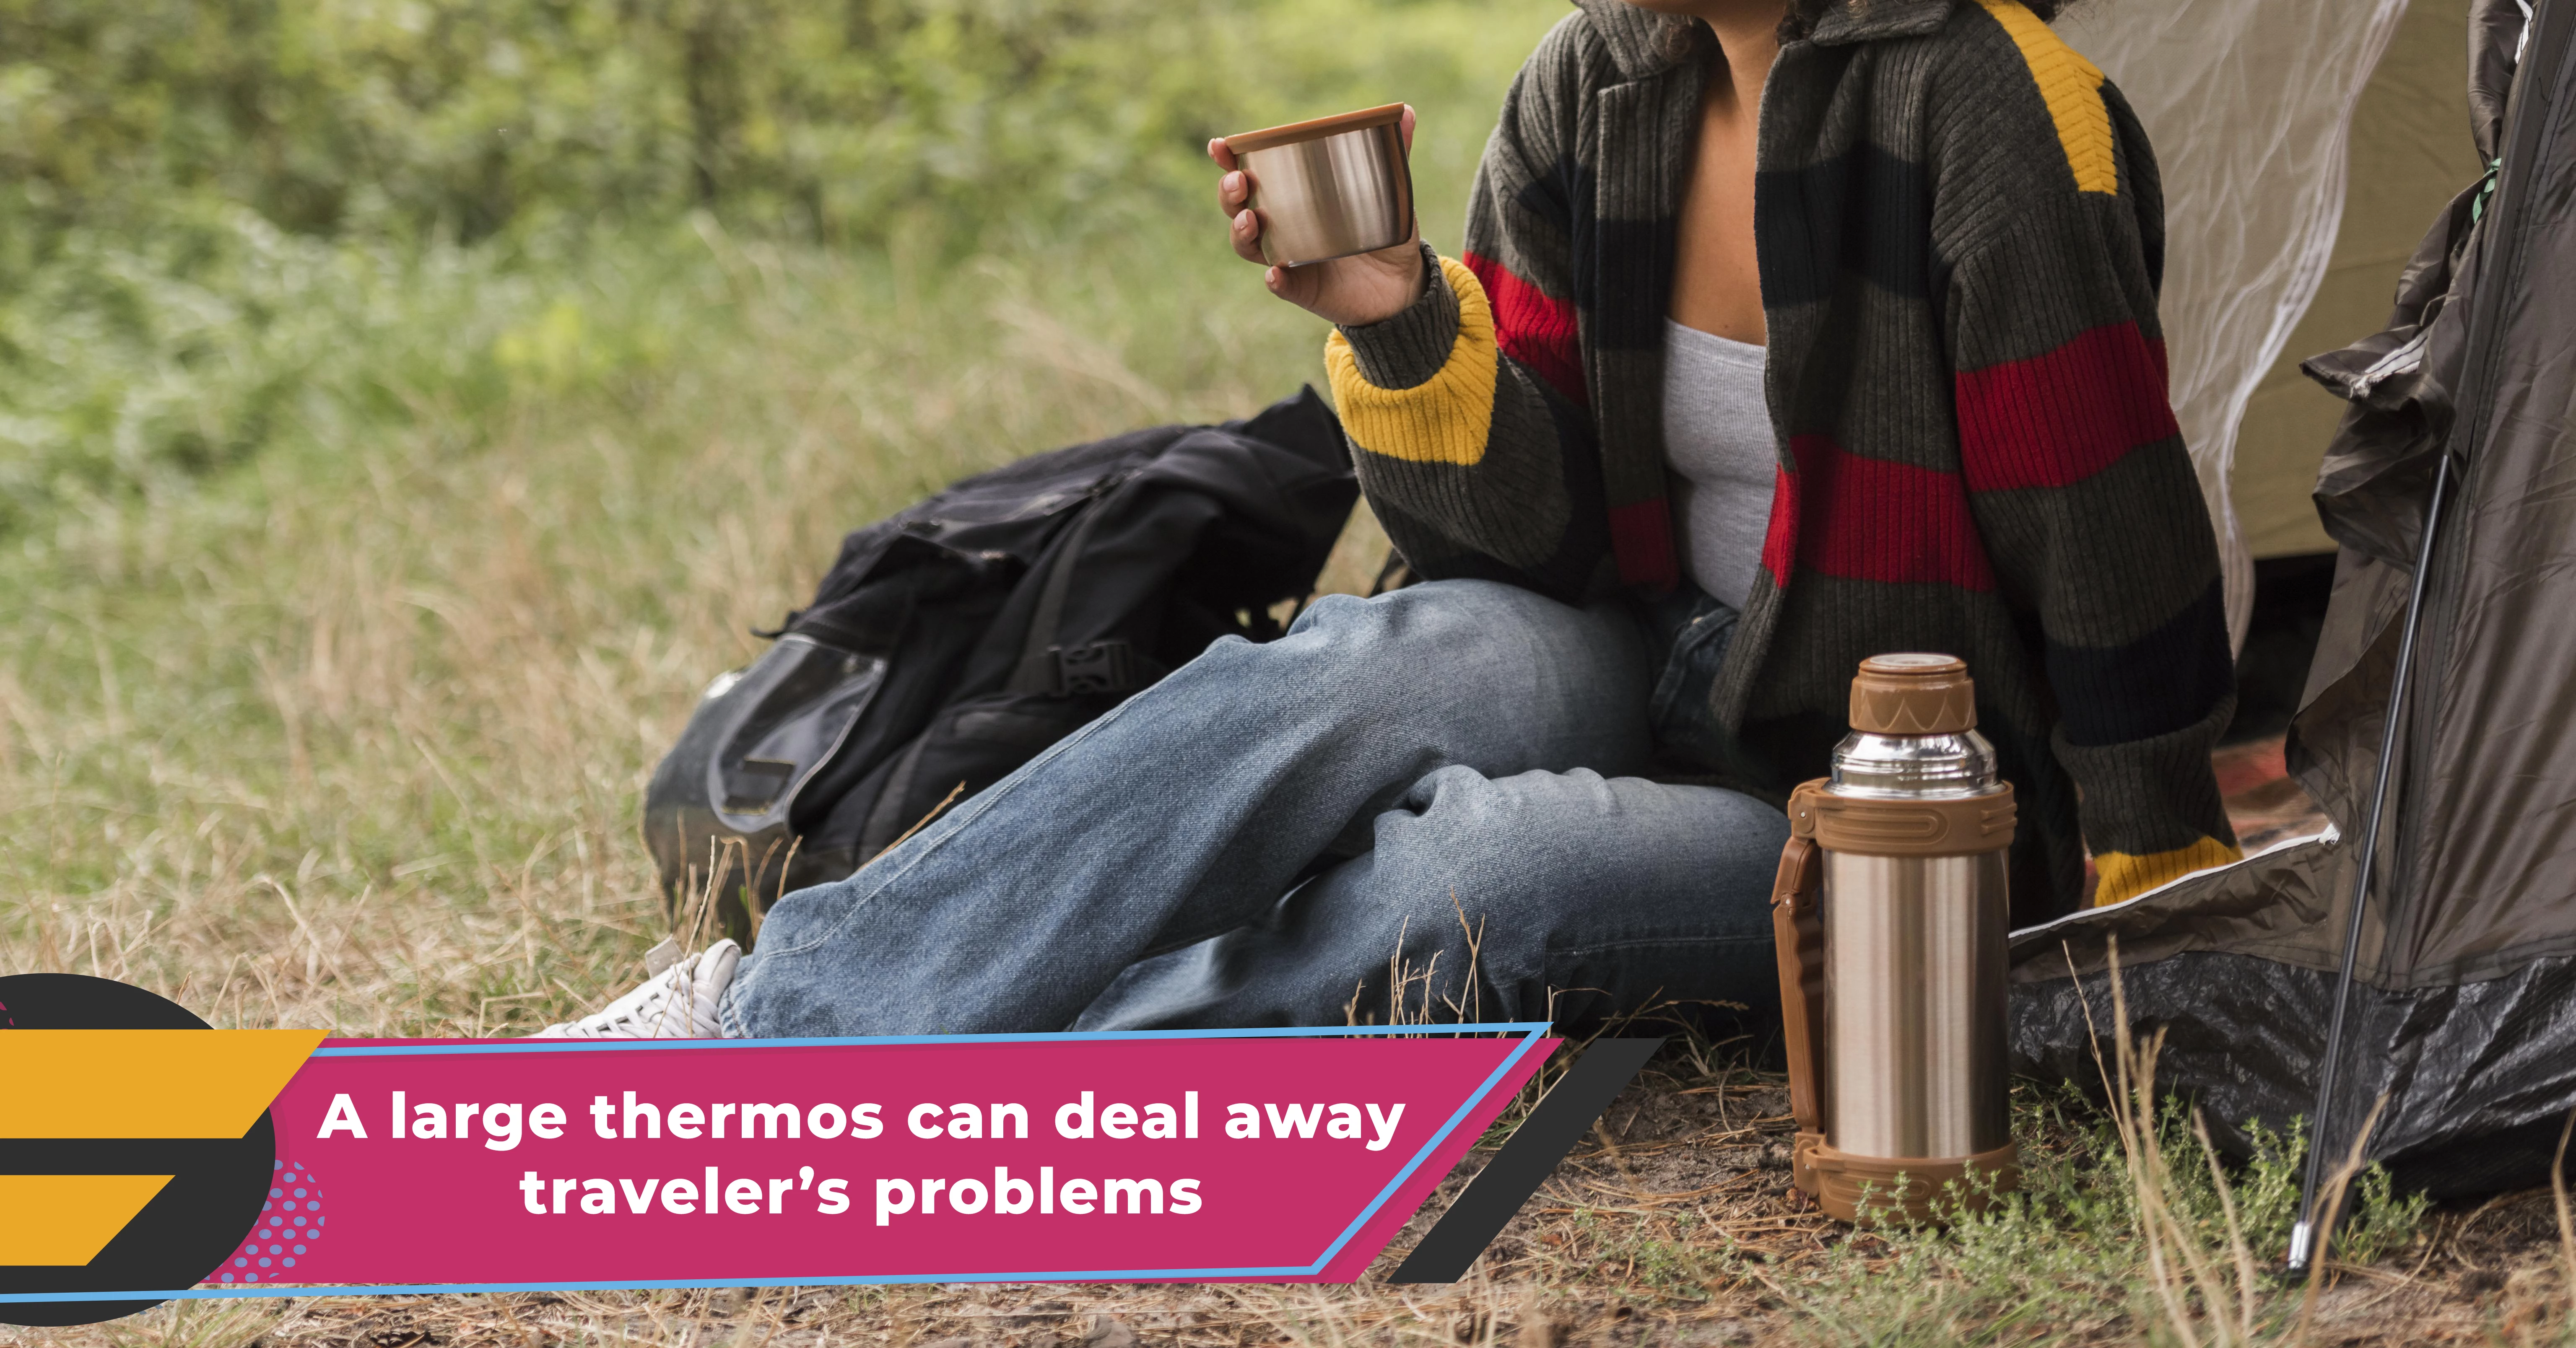 A large thermos can deal away traveler’s problems